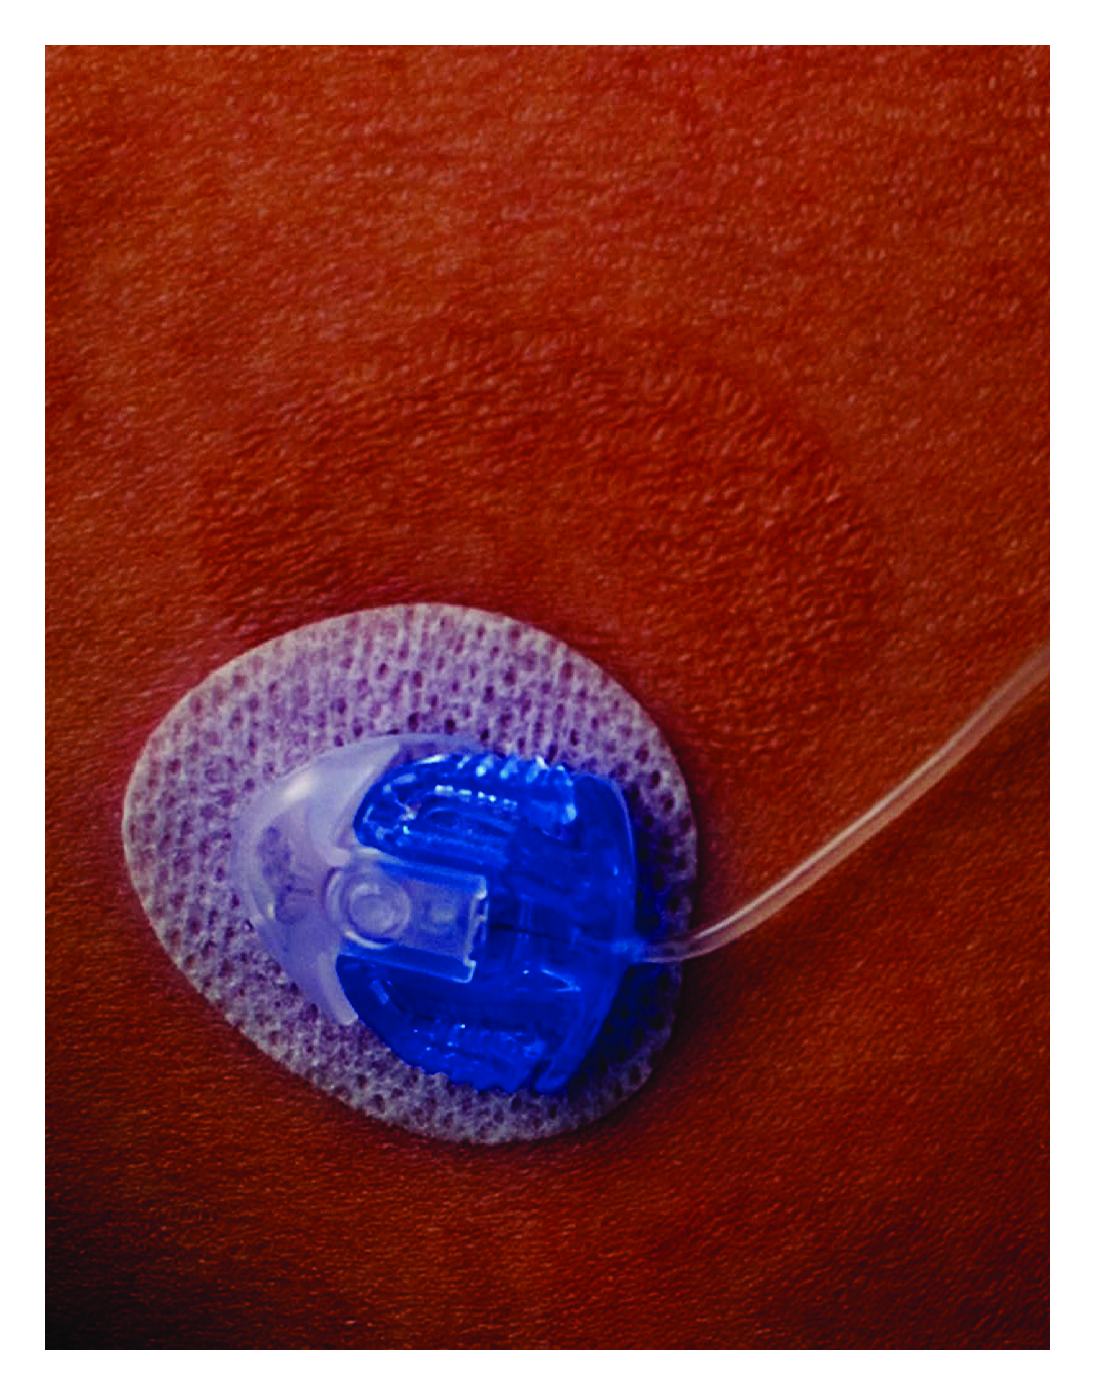 Continuous Subcutaneous Insulin Infusion for Managing Diabetes: Women's Health Implications